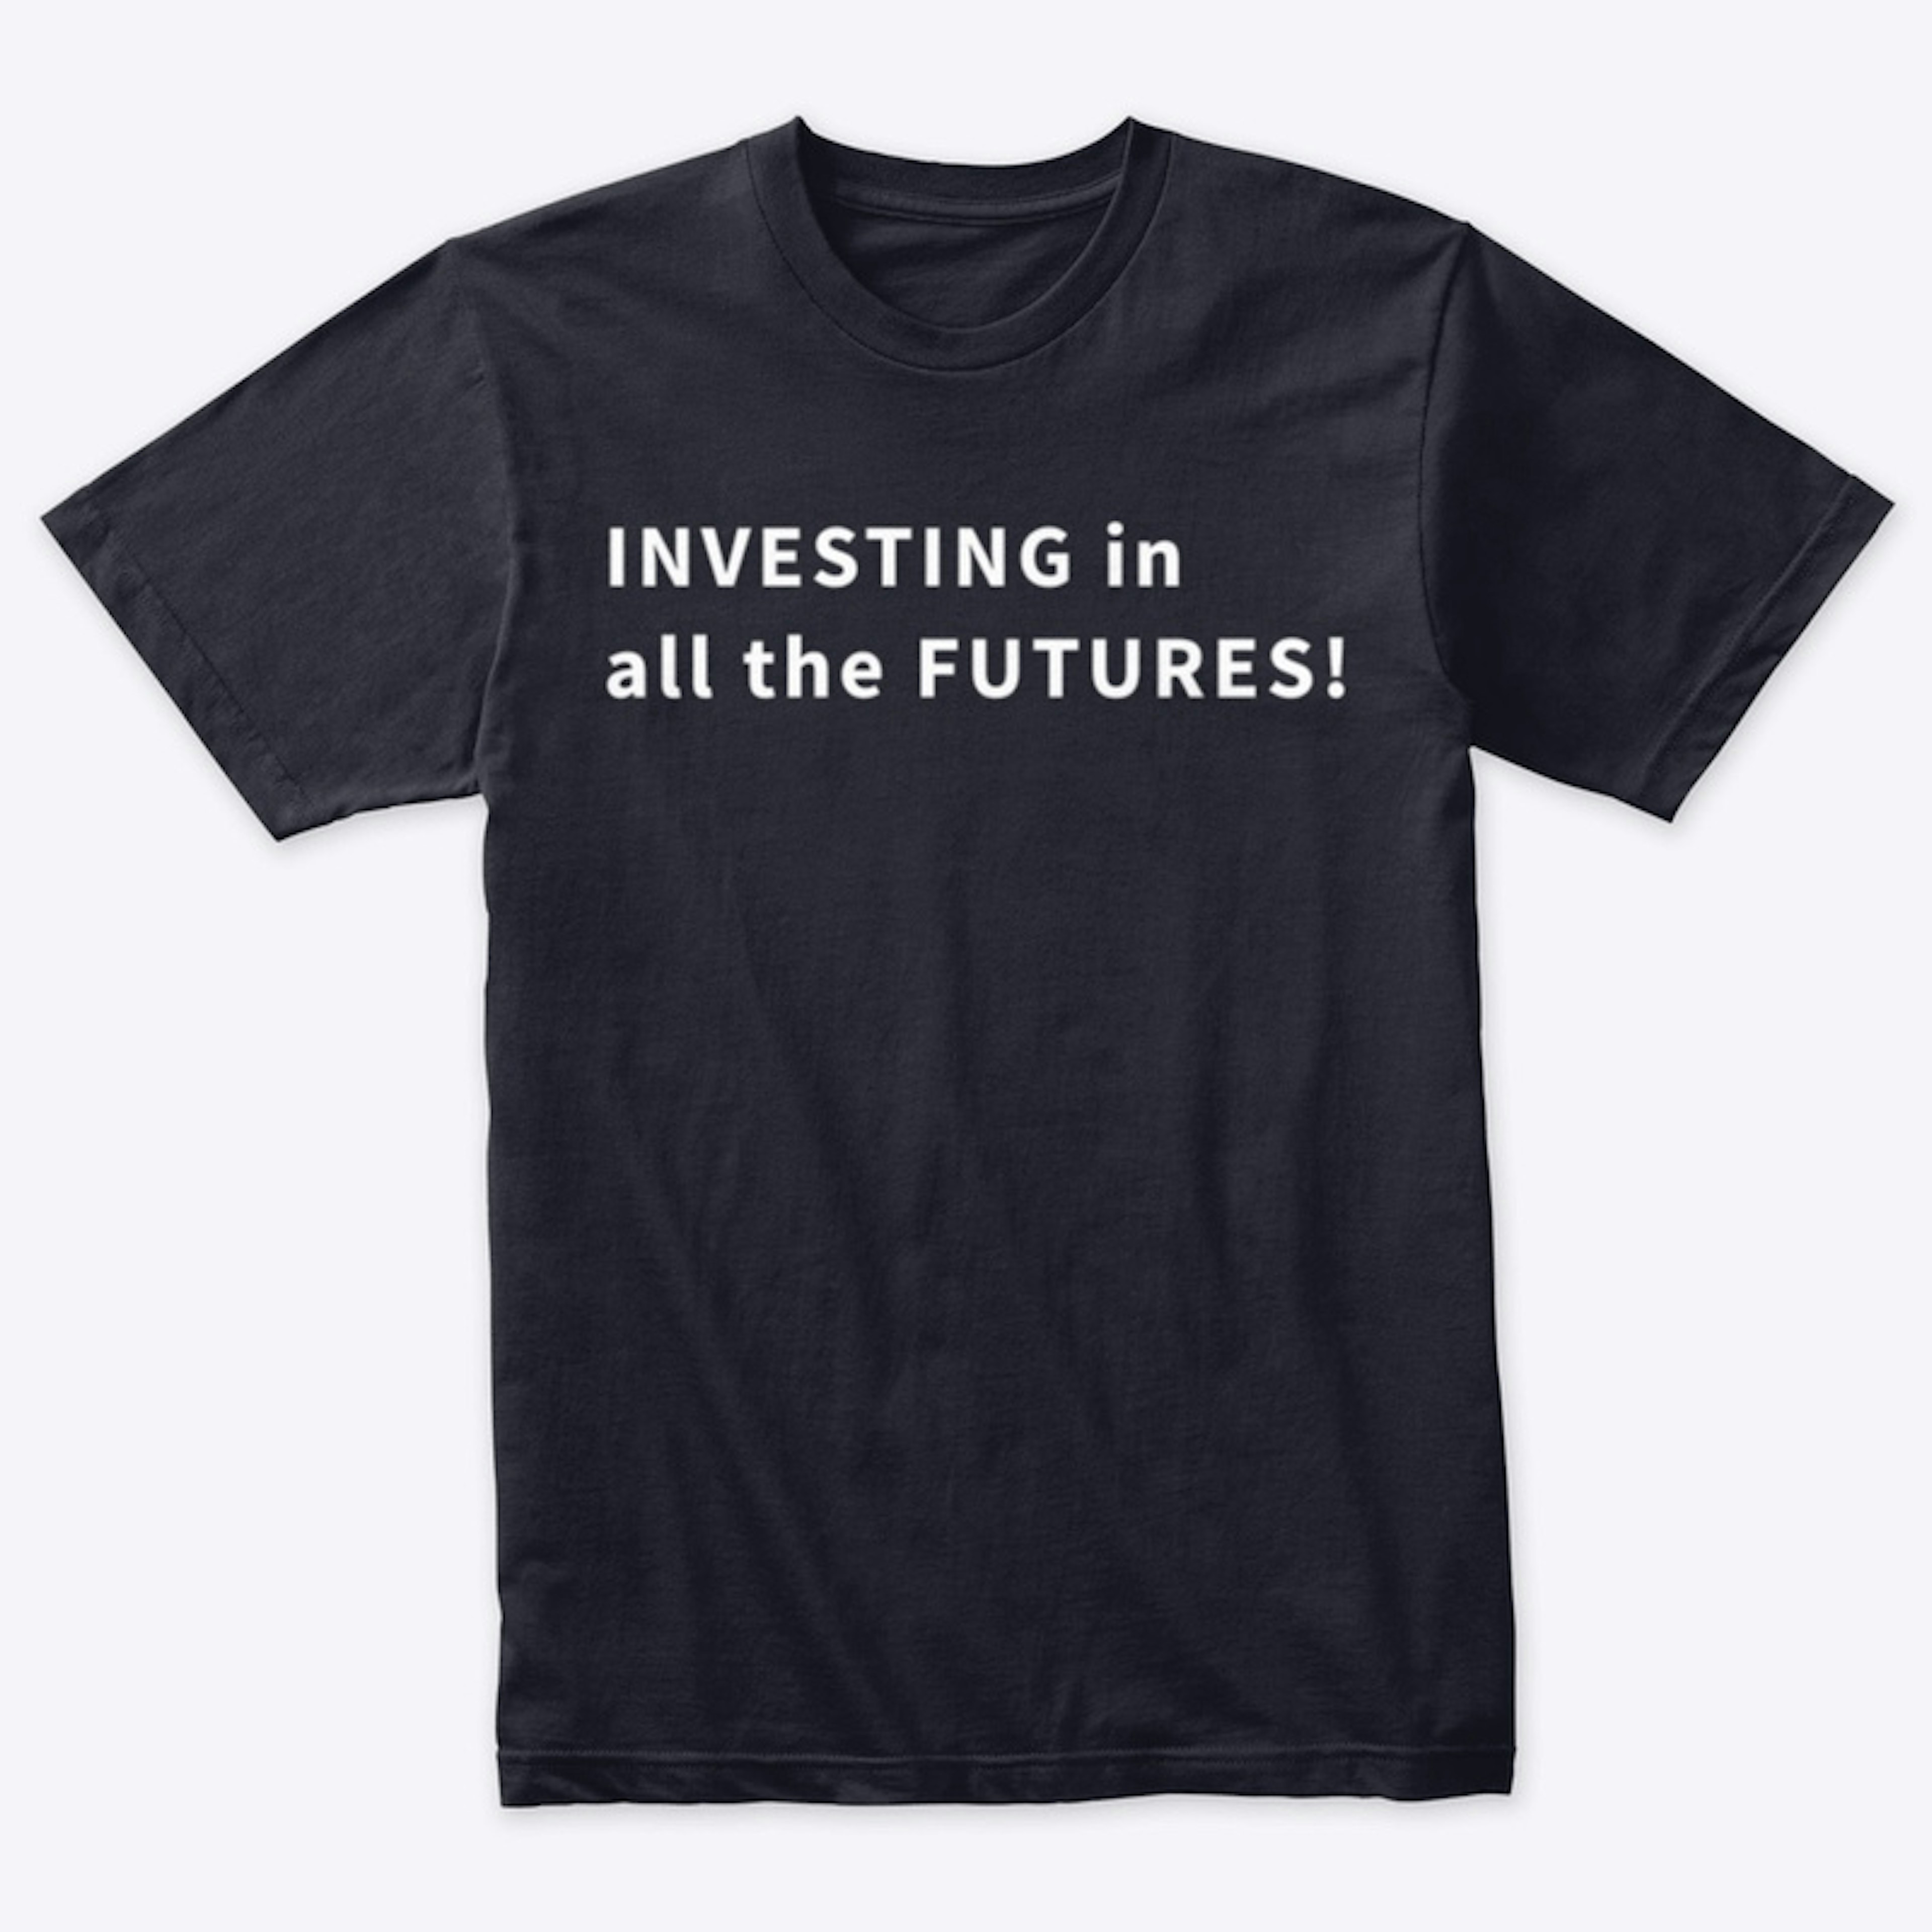 All Futures Investing Tee